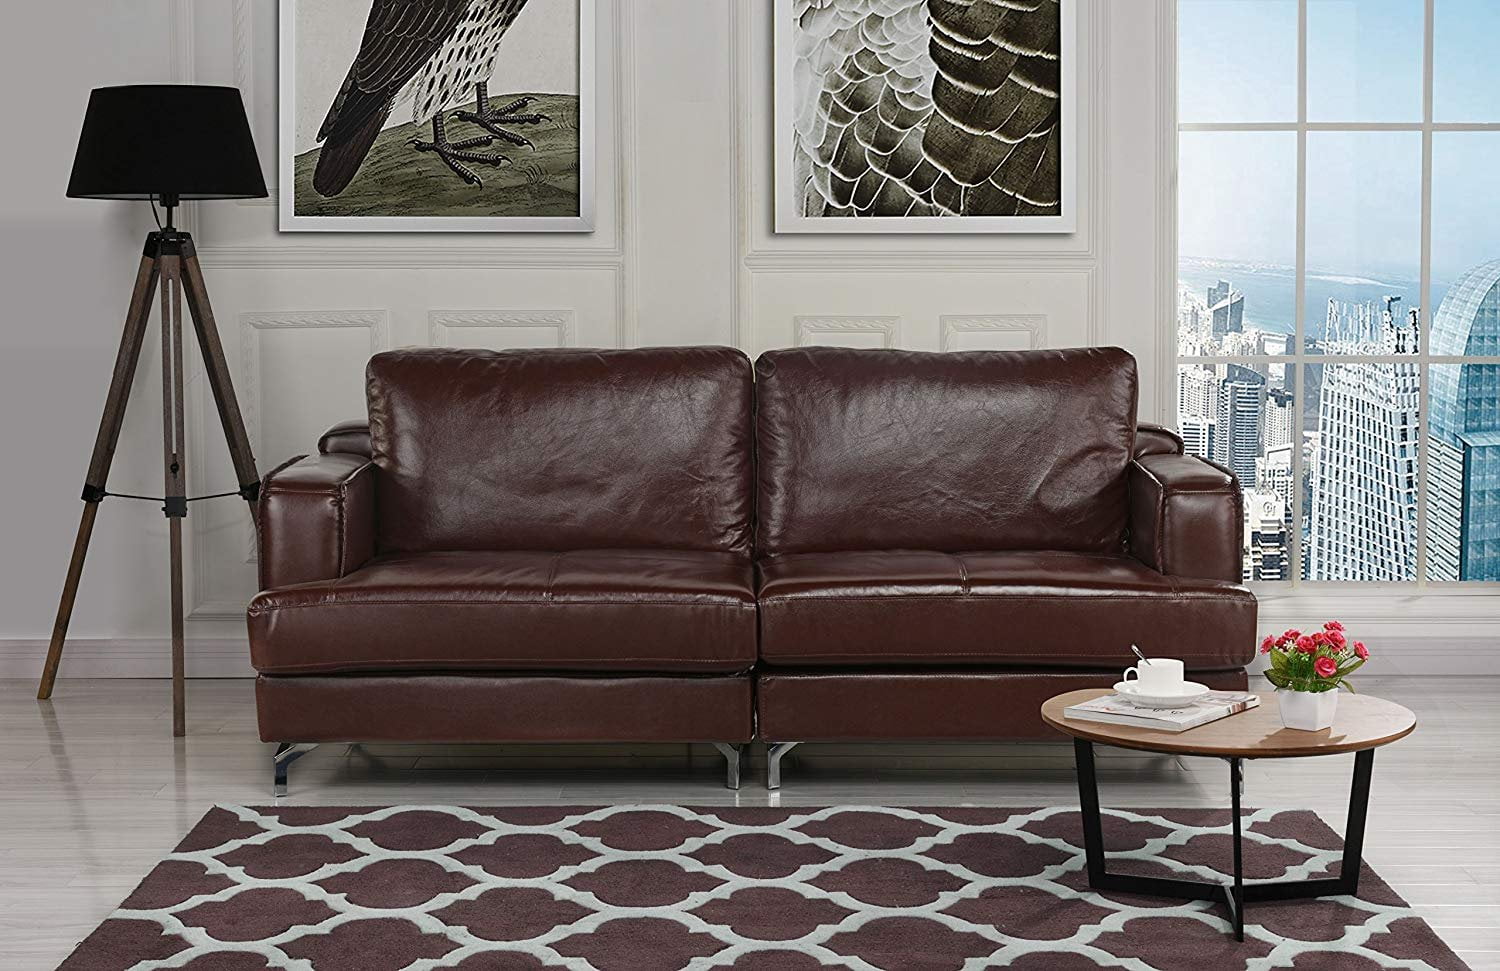 Leather Modern Sofas - All Images